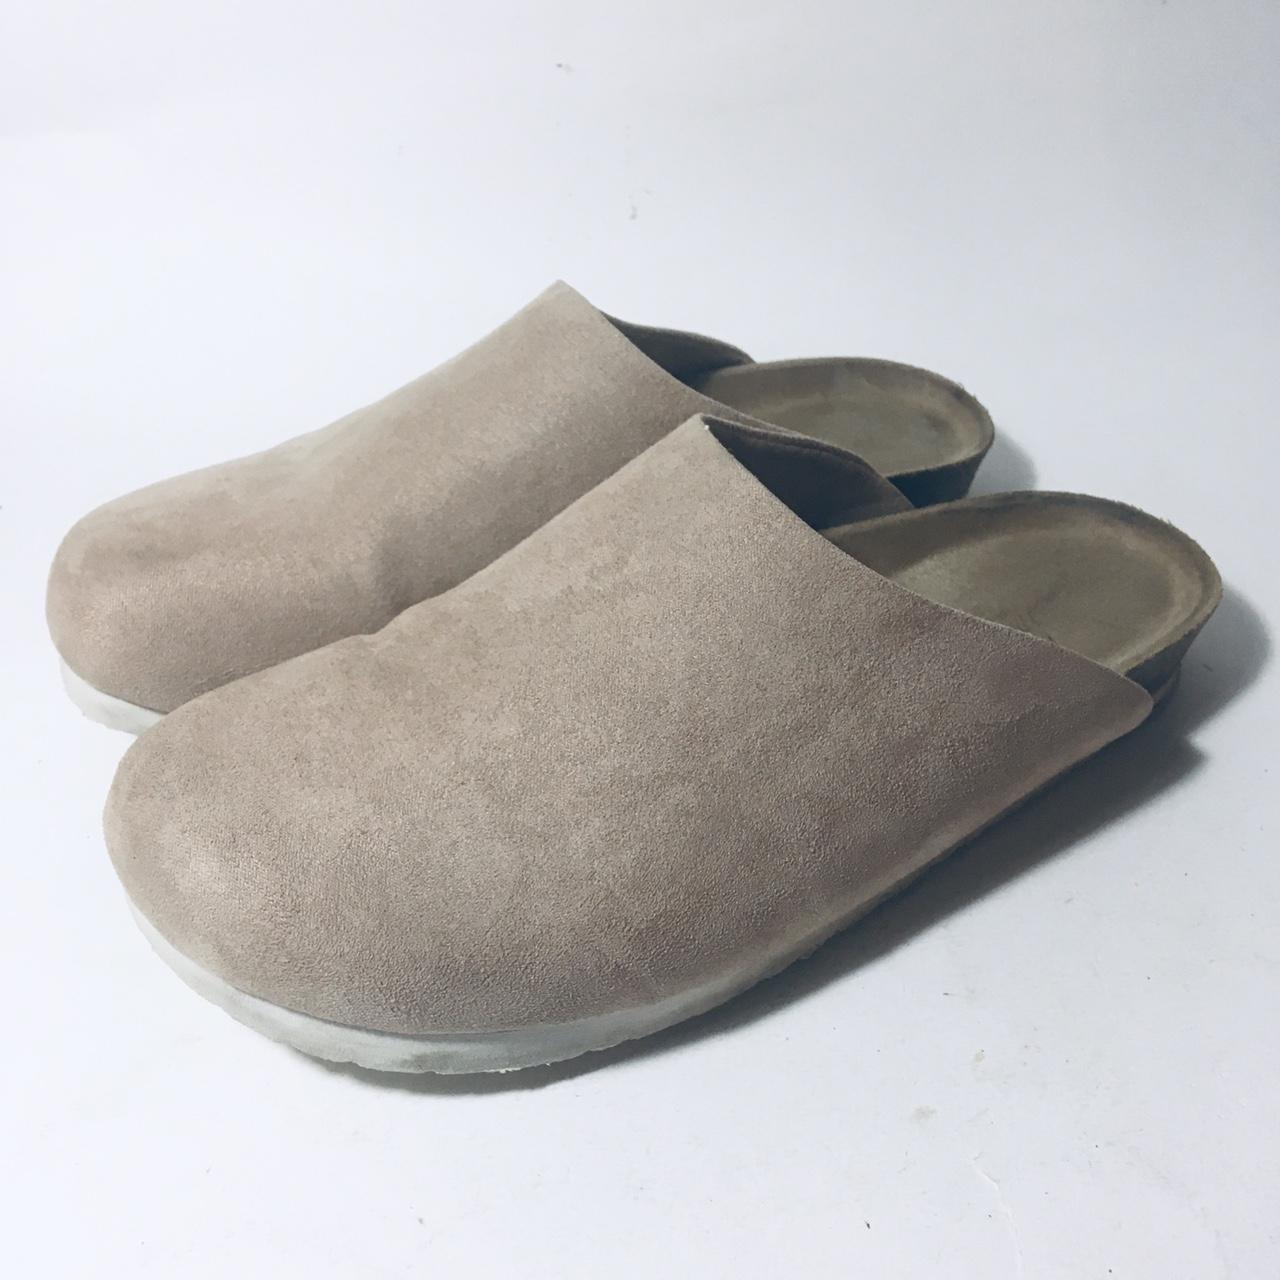 These Universal Thread by Target Slip-On Clog... - Depop